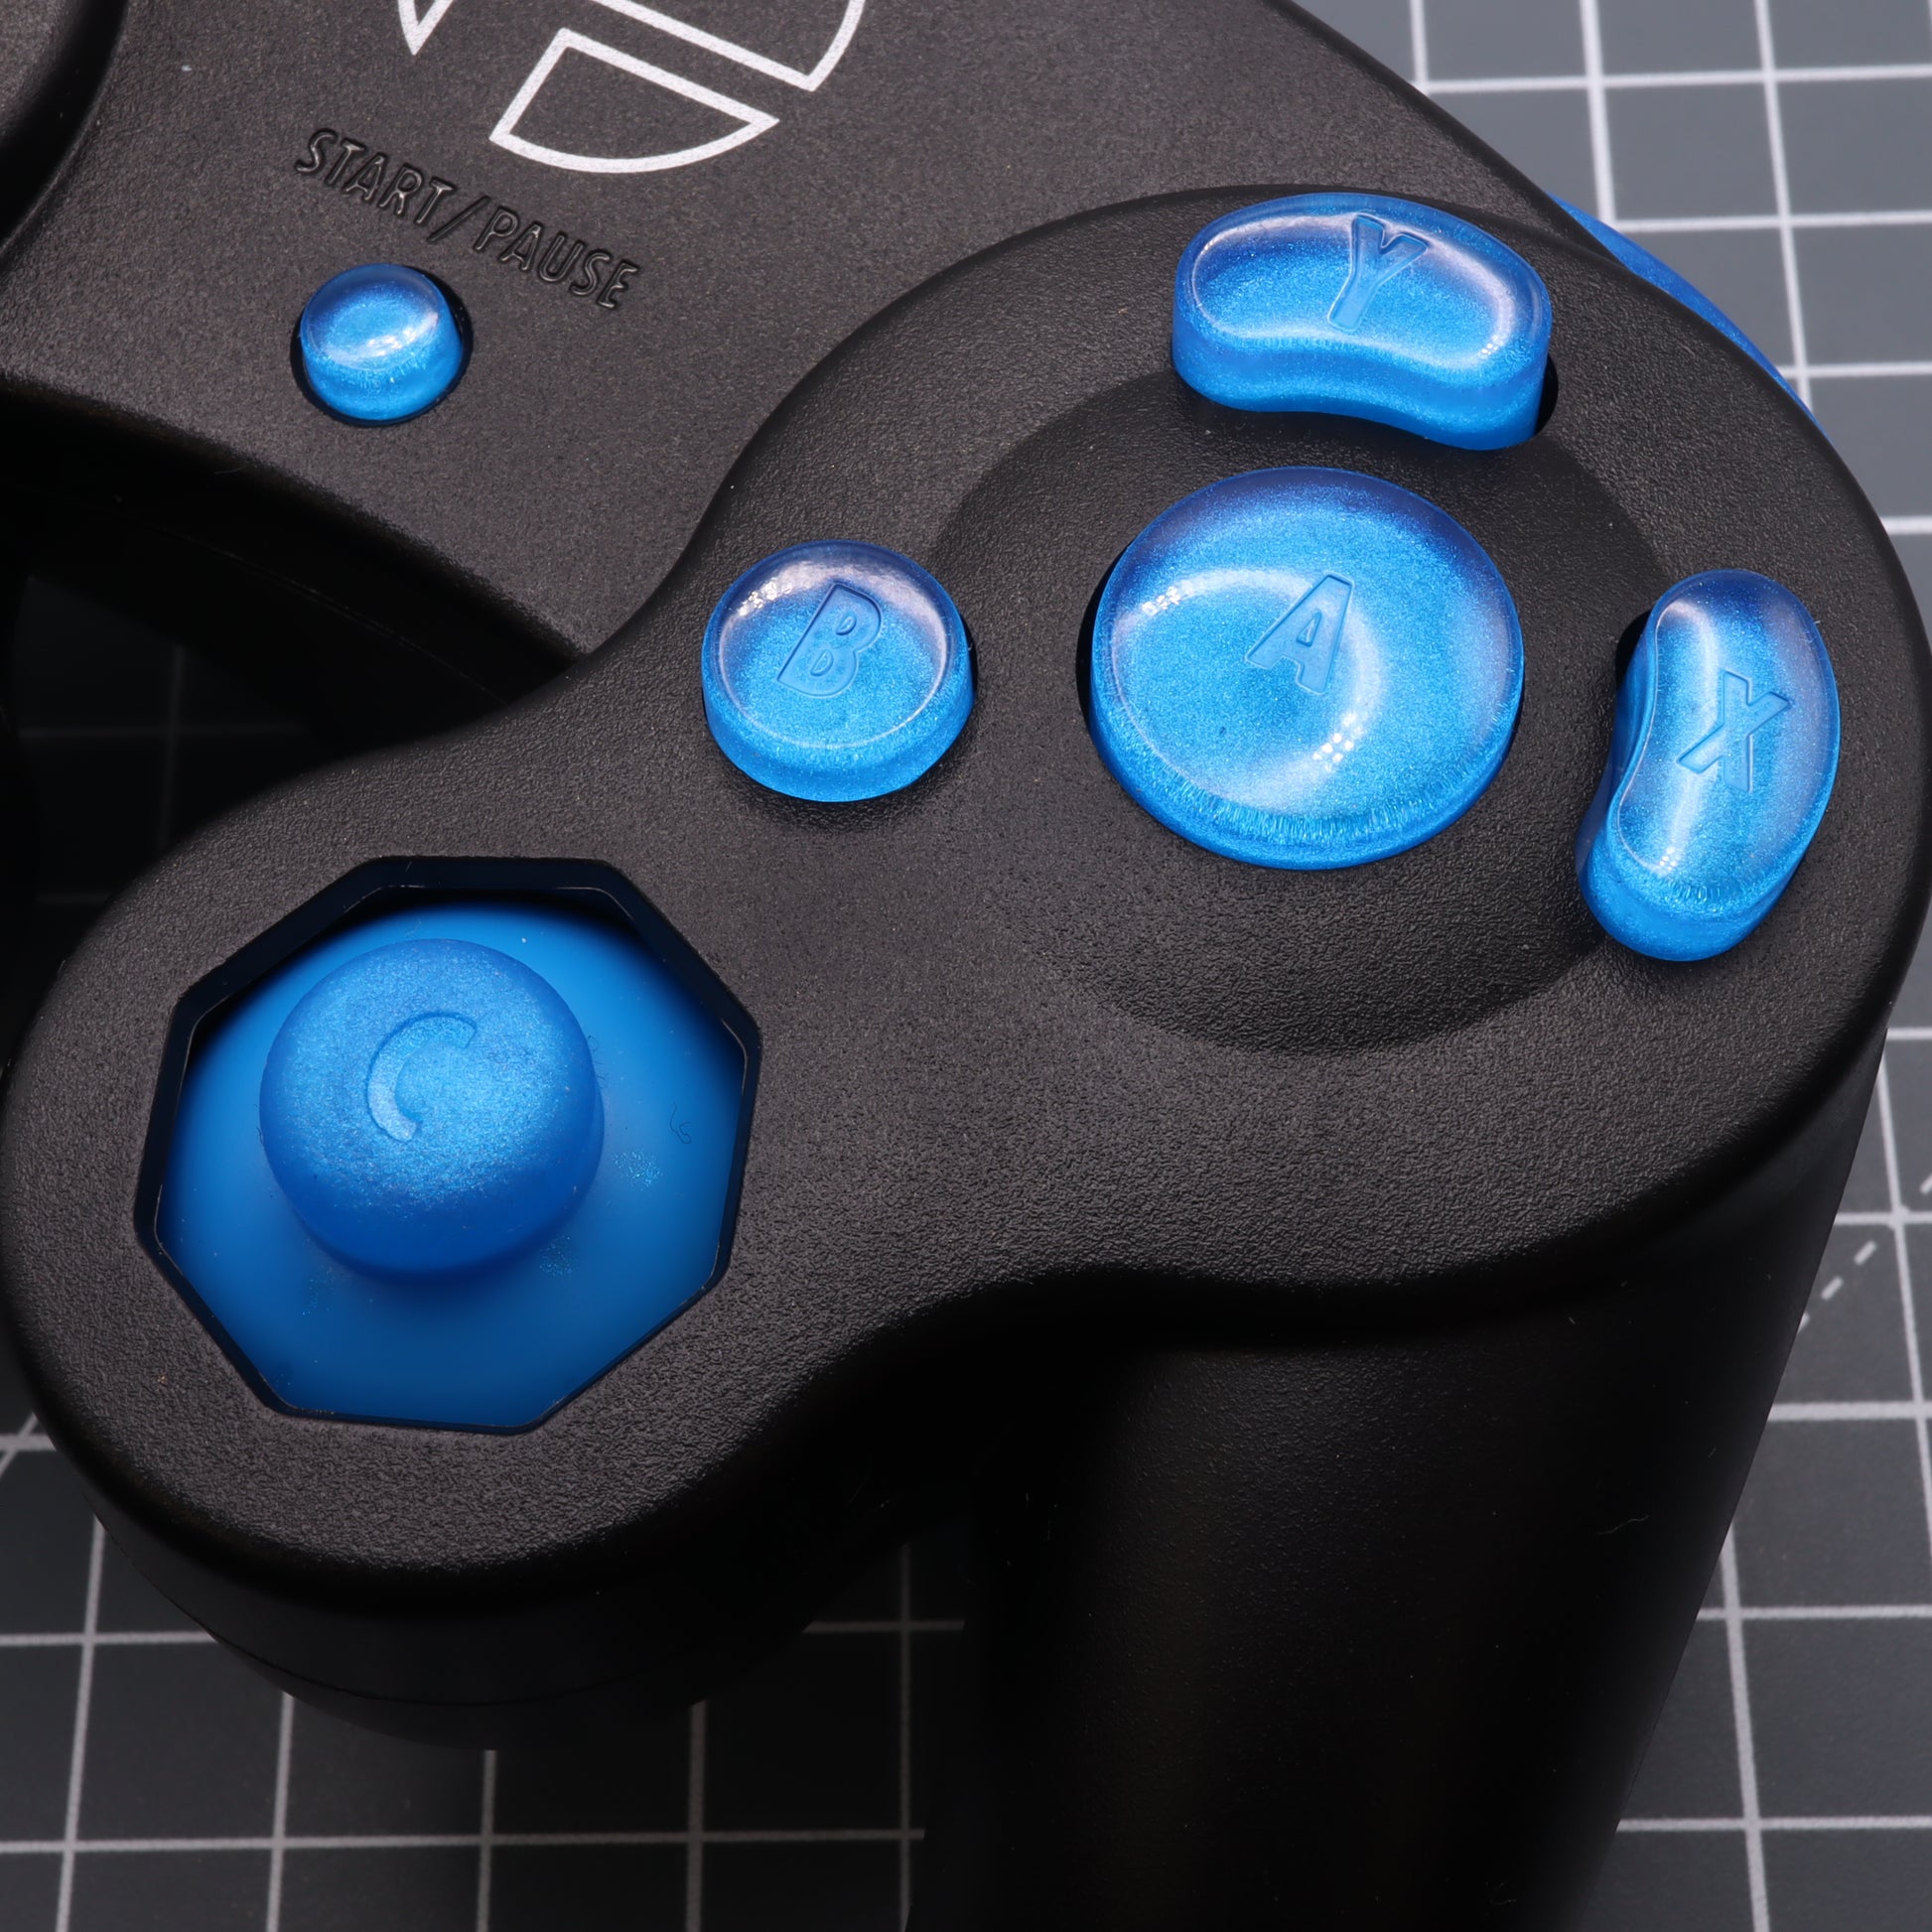 Close-up of a black GameCube controller with custom-cast blue buttons on a patterned surface.